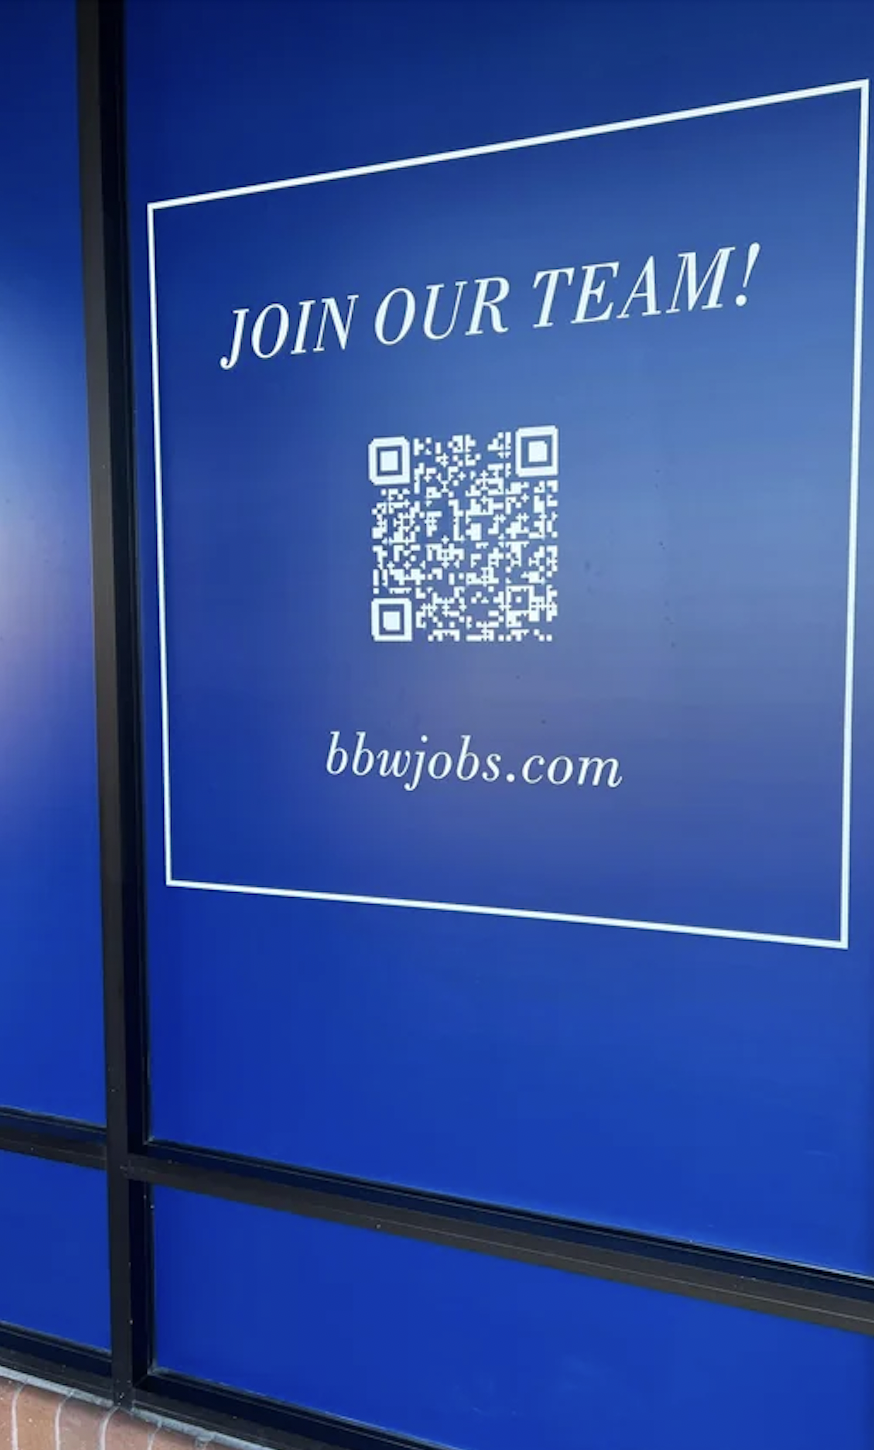 signage - Join Our Team! bbwjobs.com